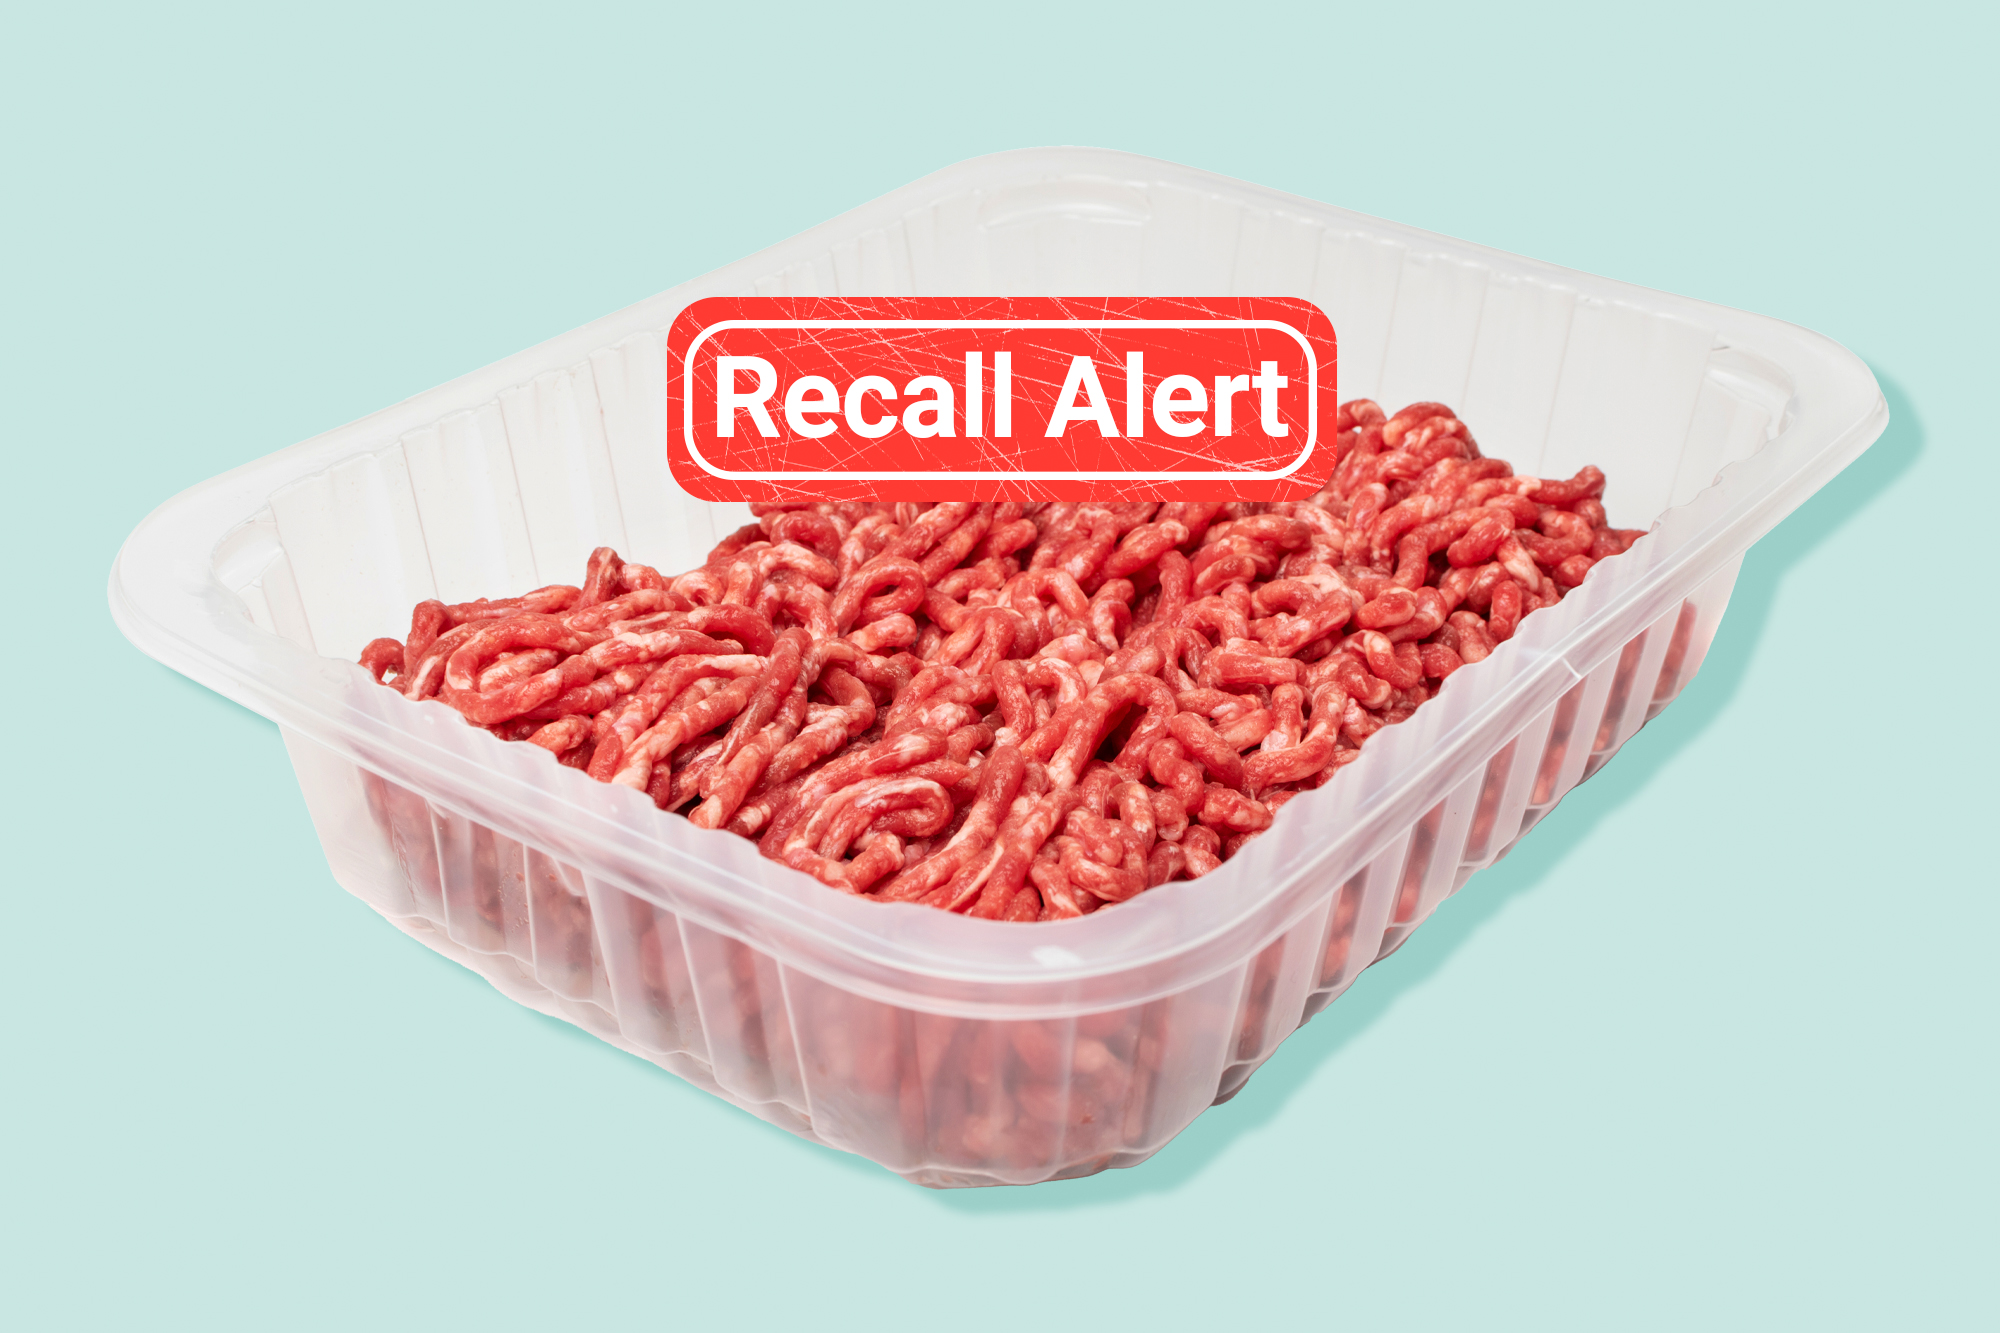 Lakeside Refrigerated Services Recalls More Than 120,000 Pounds of